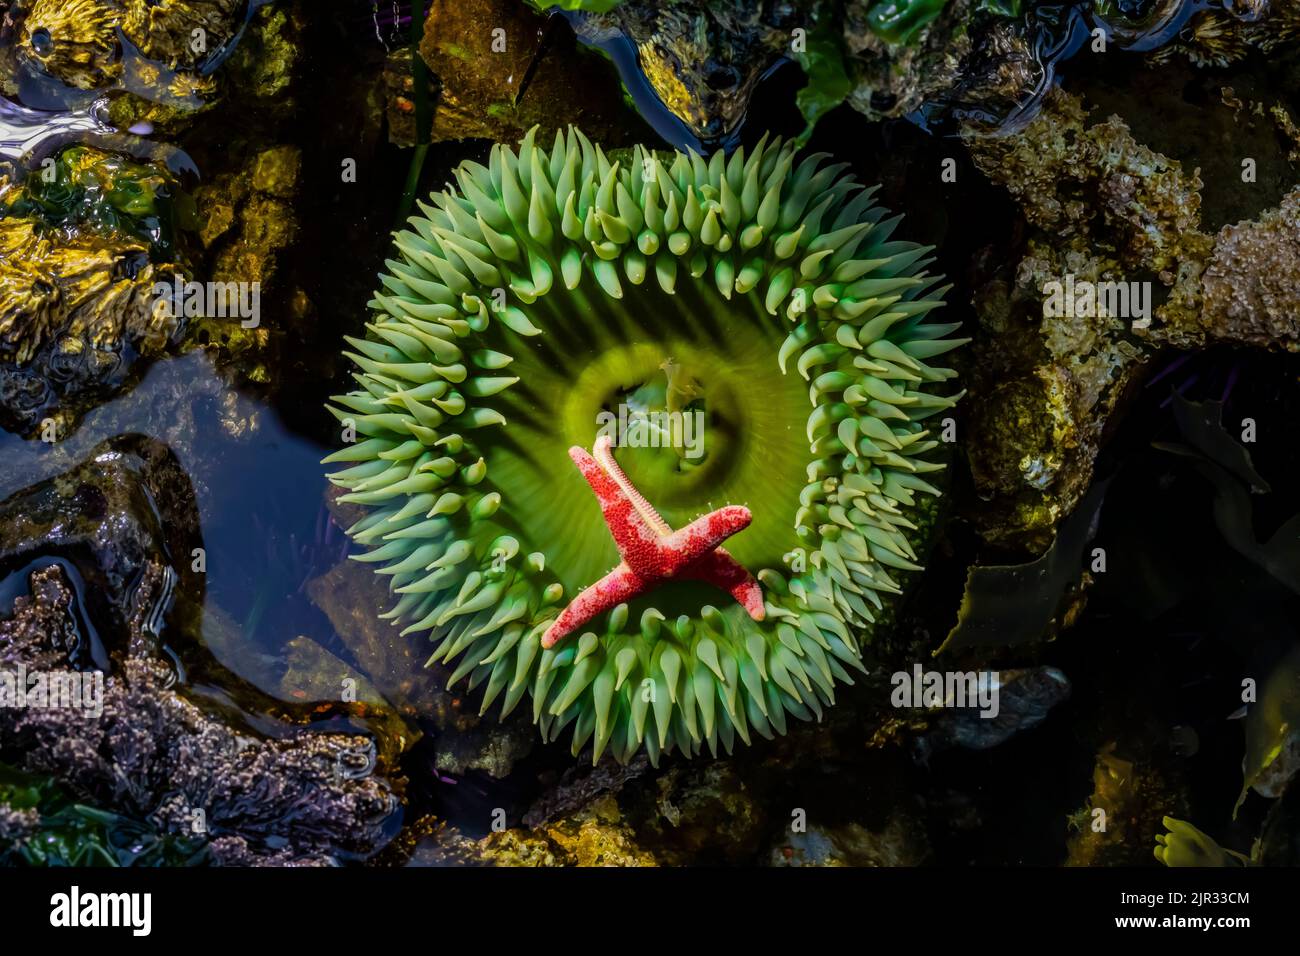 Giant Green Anemone with Blood Star at Tongue Point in Salt Creek Recreation Area along the Strait of Juan de Fuca, Olympic Peninsula, Washington Stat Stock Photo